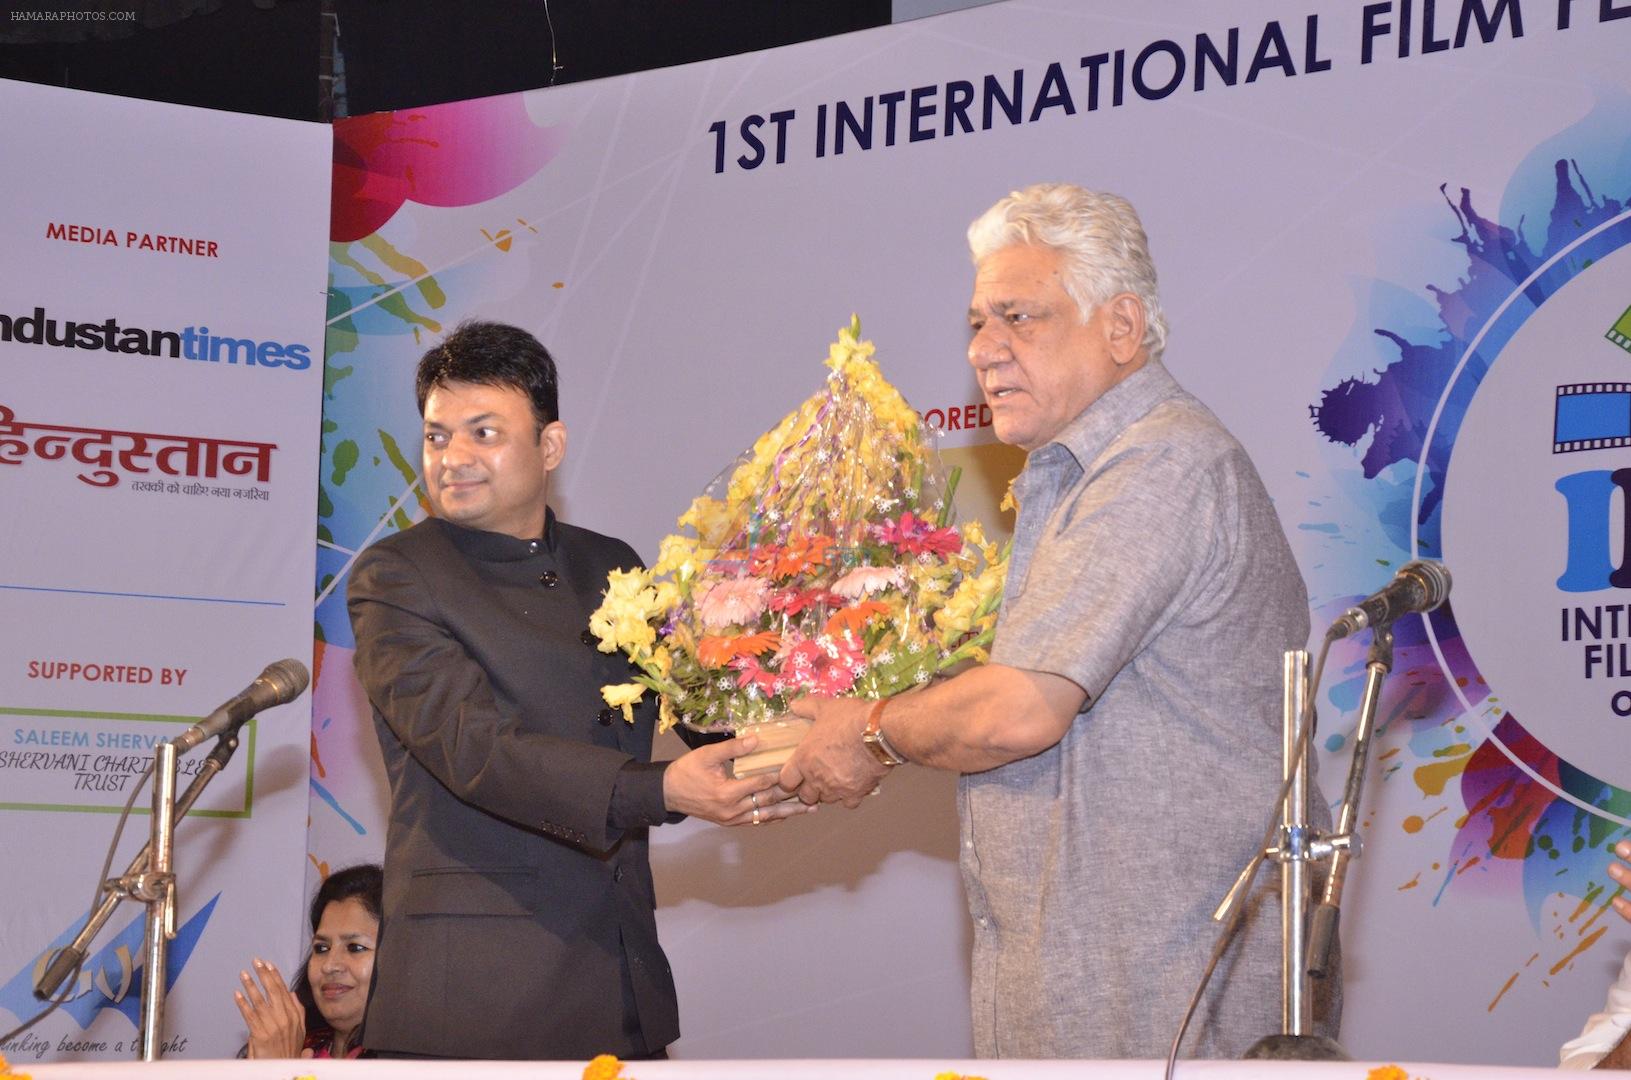 Om Puri awarded with the Lifetime Achievement Award at IFFP on 26th Feb 2015